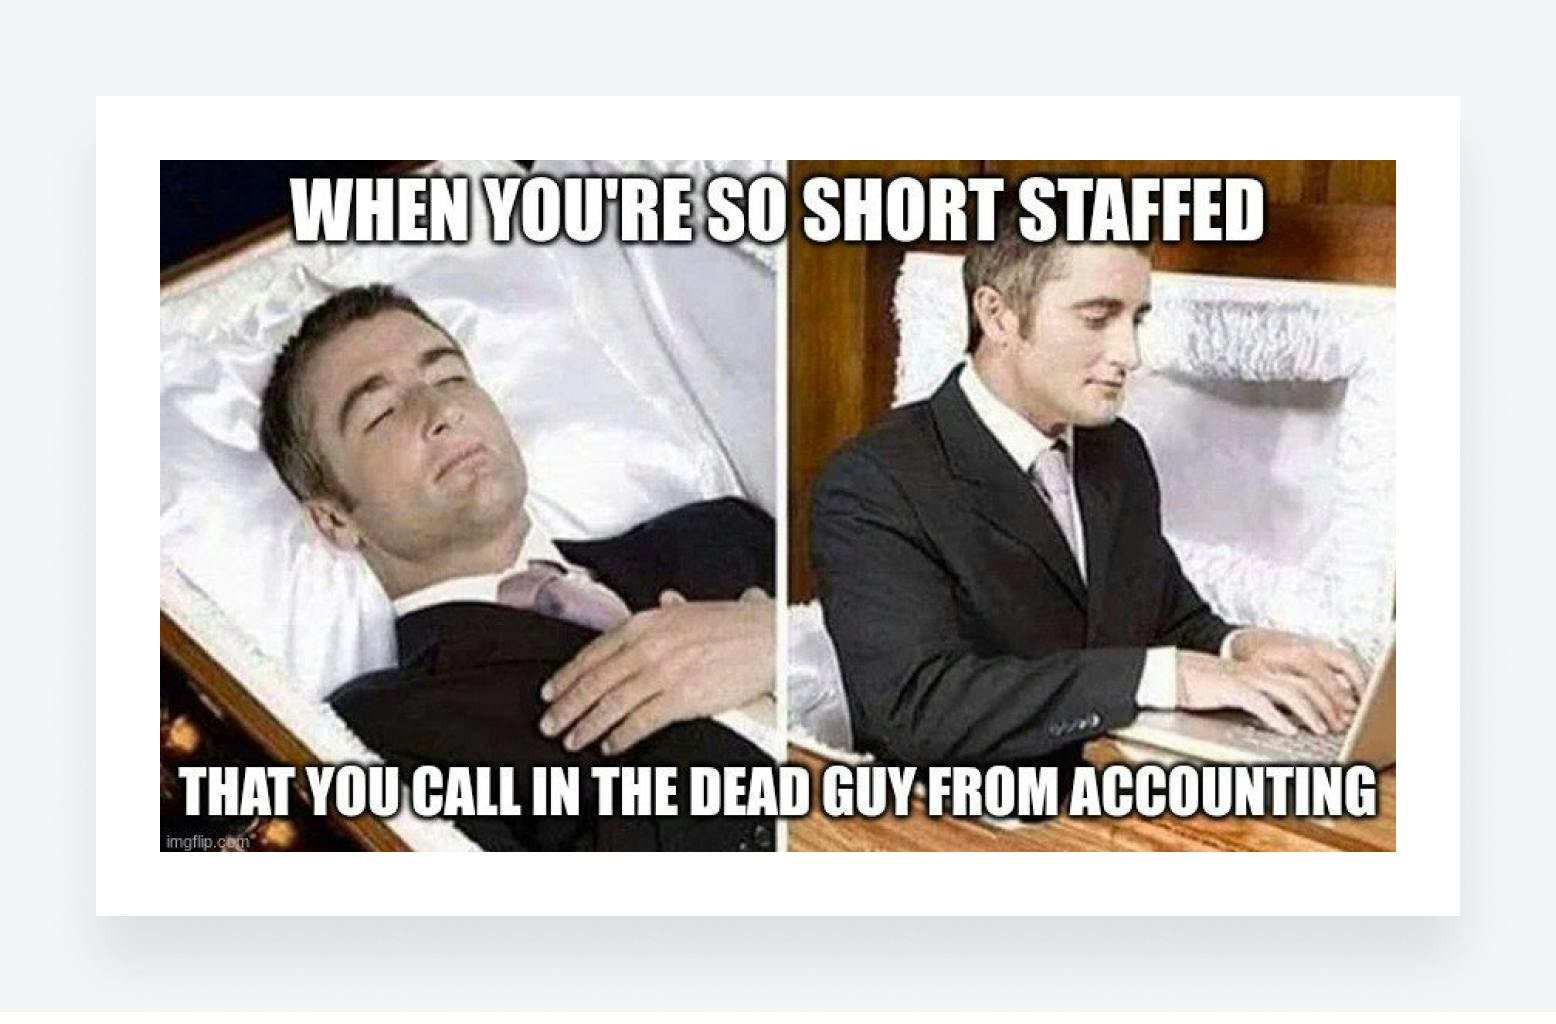 Accounting meme of never catching a break from work